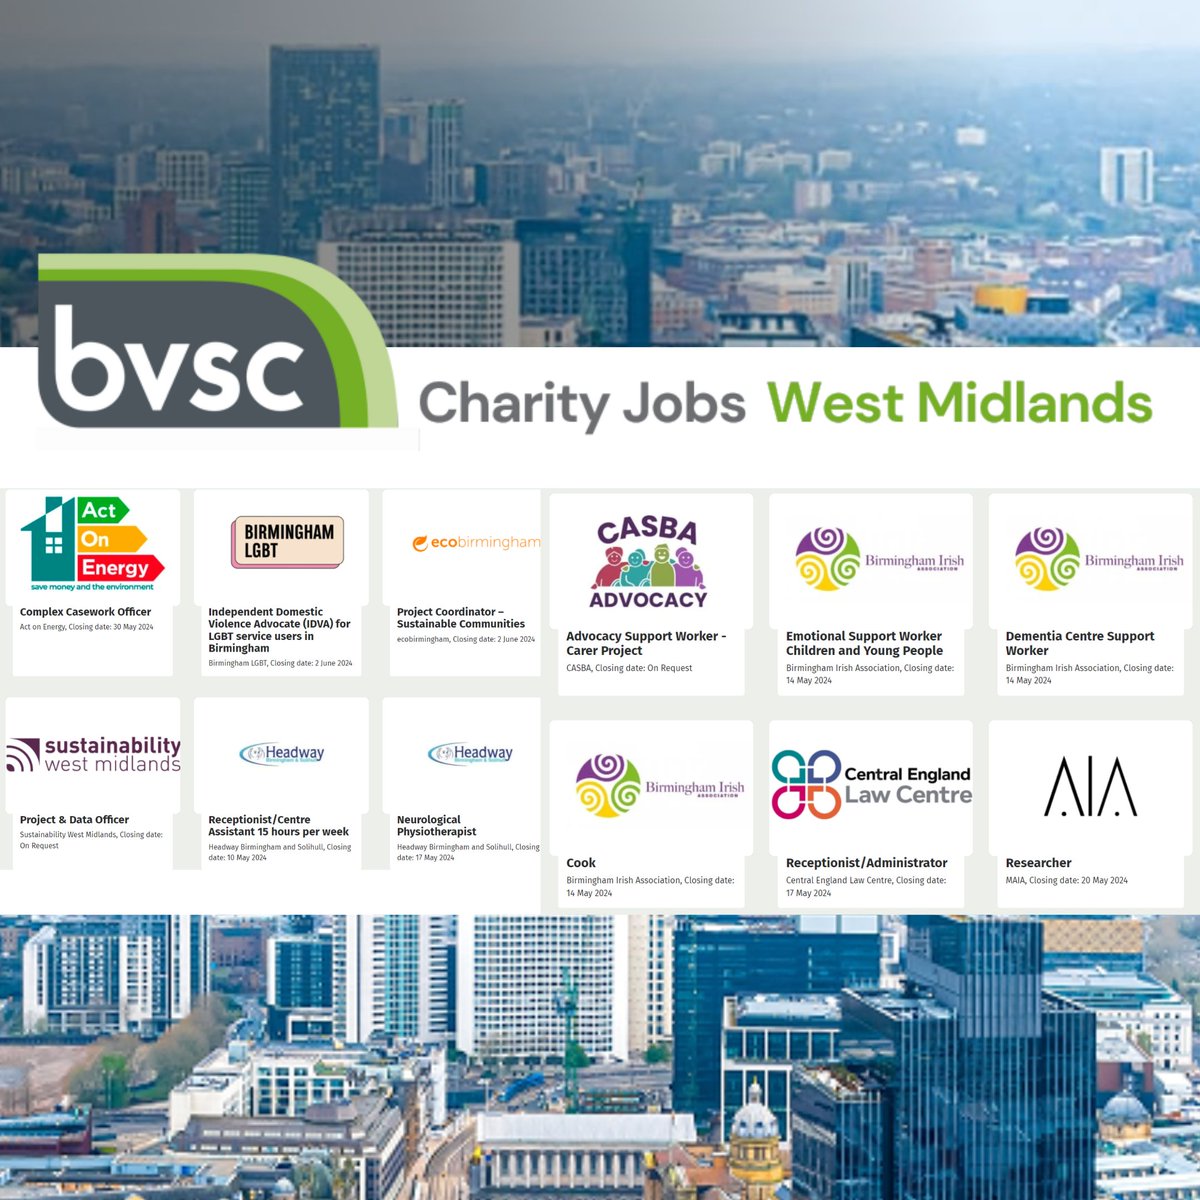 Find all the latest WestMidlands Charity Jobs on the BVSC Jobs Website. #jobsearch #birminghamjobs #westmidlandsjobs bvsc.org/bvsc-charity-j…